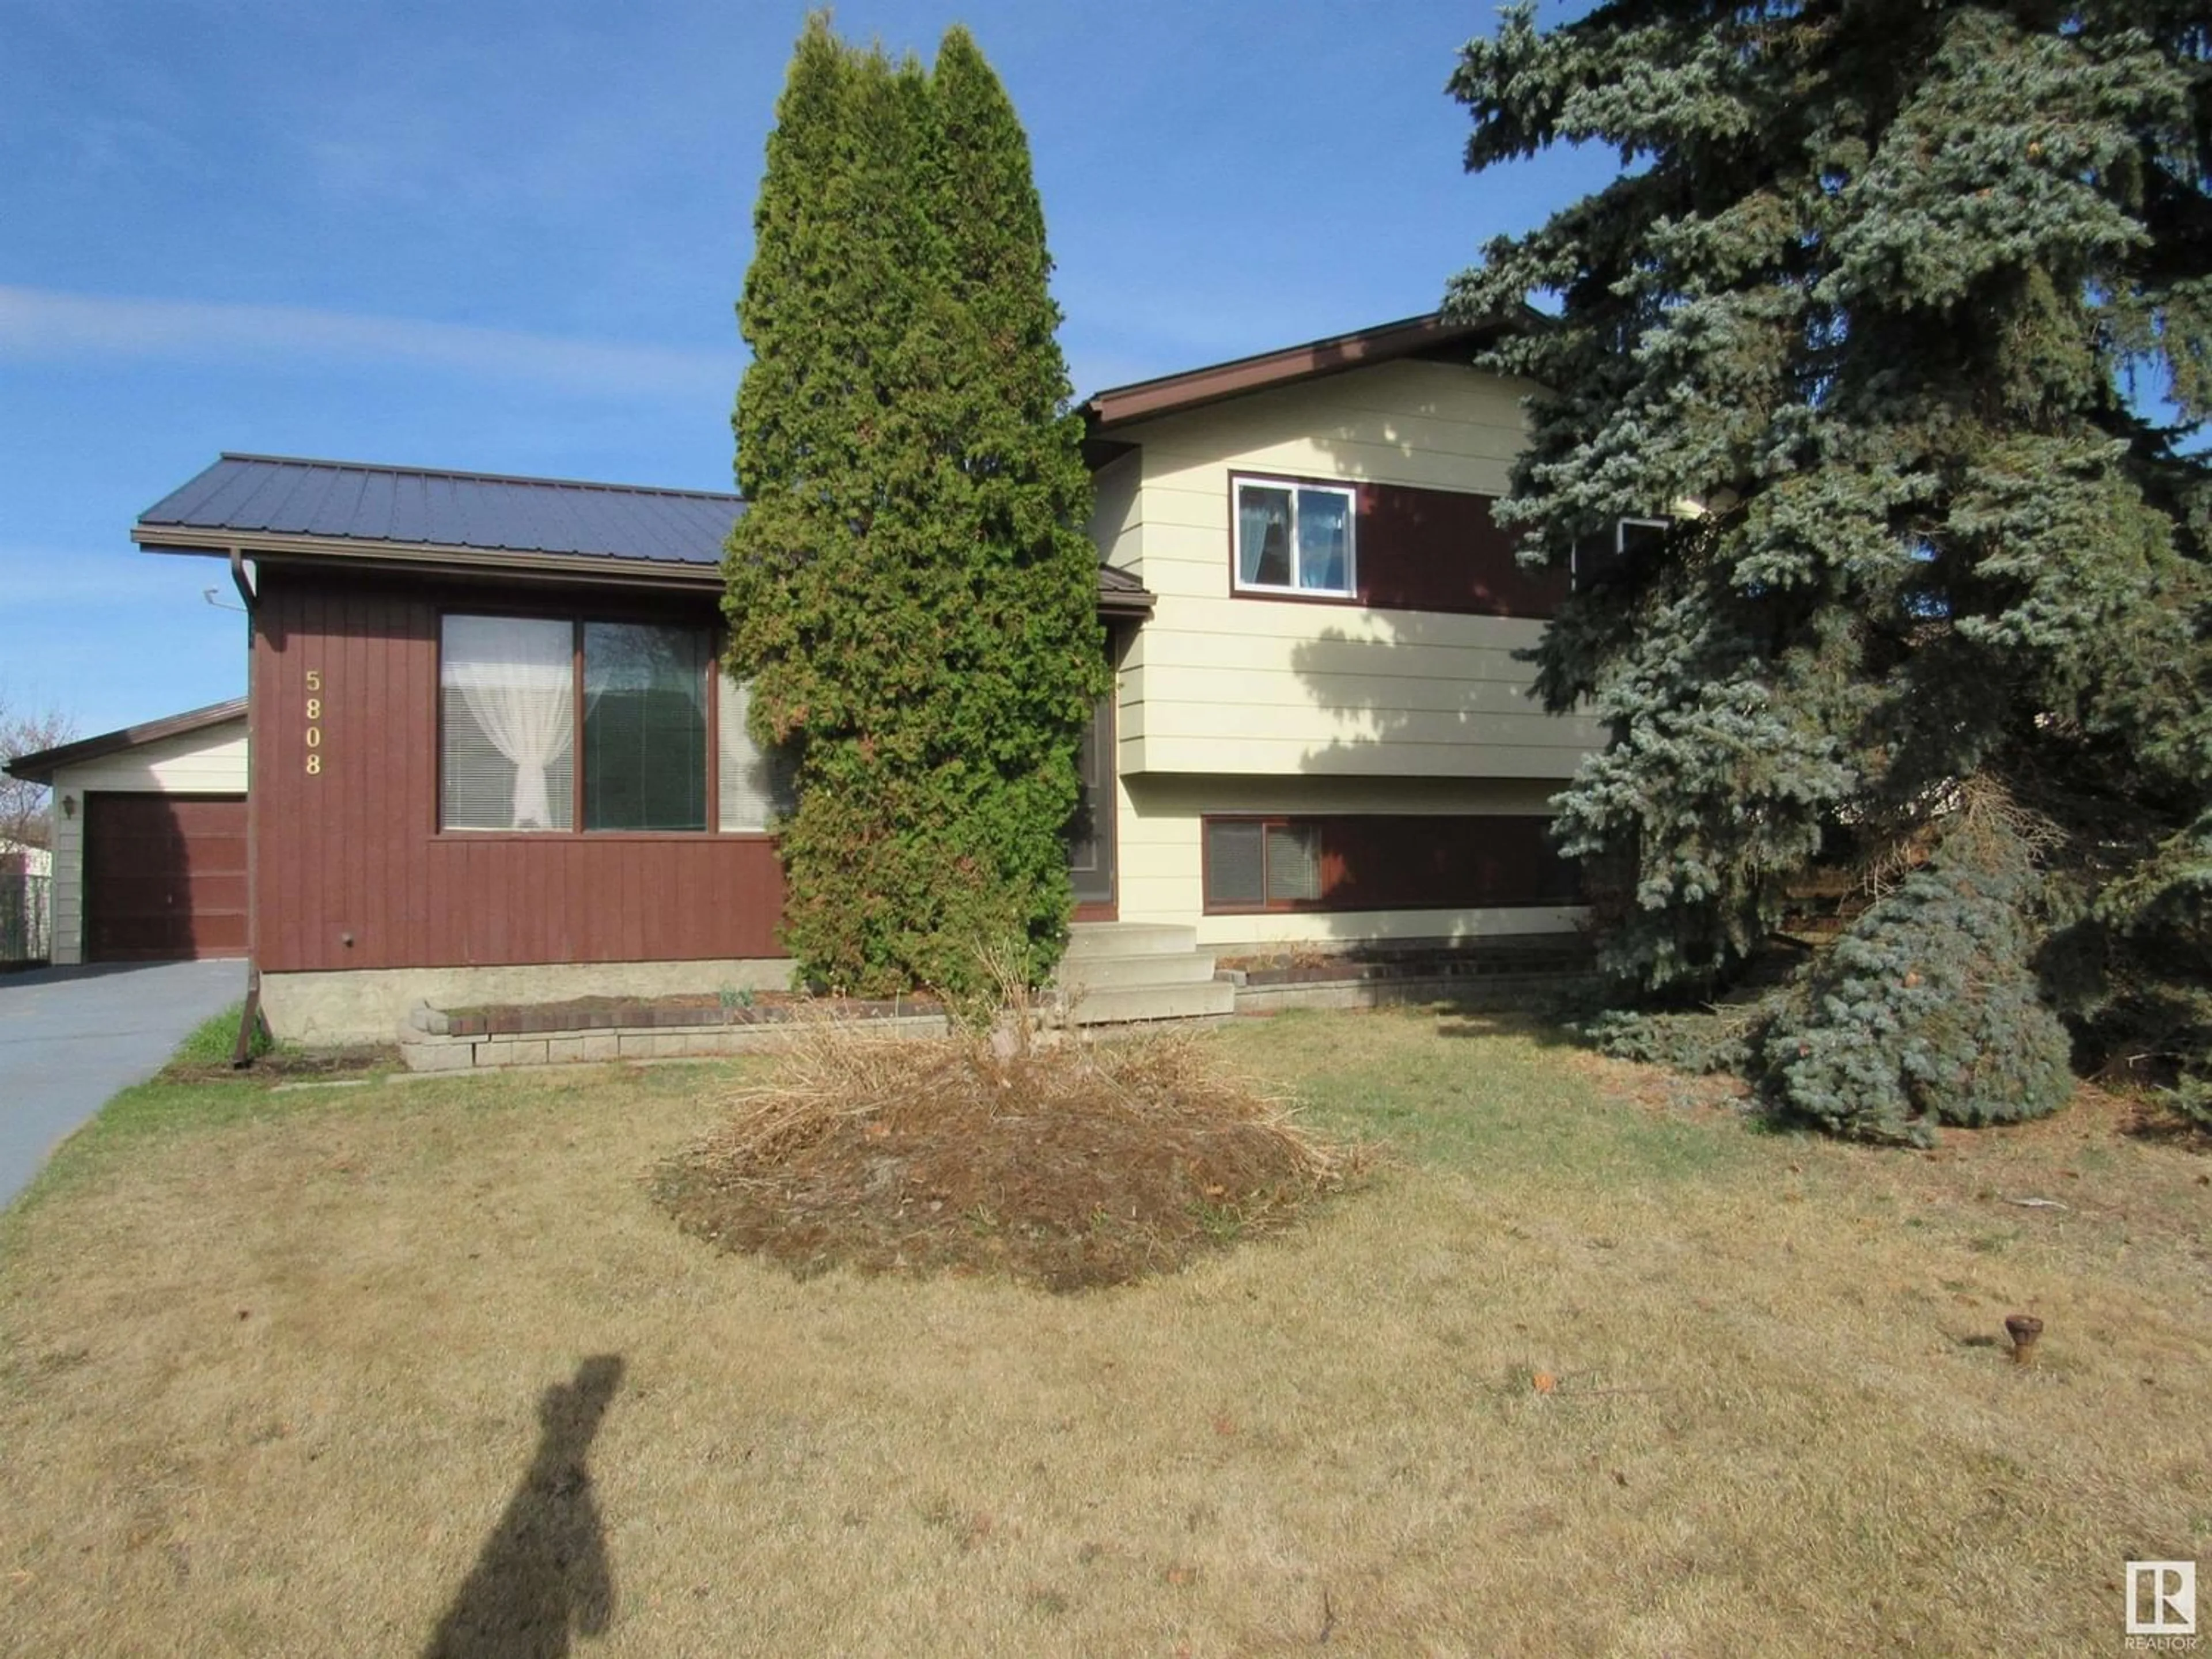 Outside view for 5808 56 ST, Barrhead Alberta T7N1C7